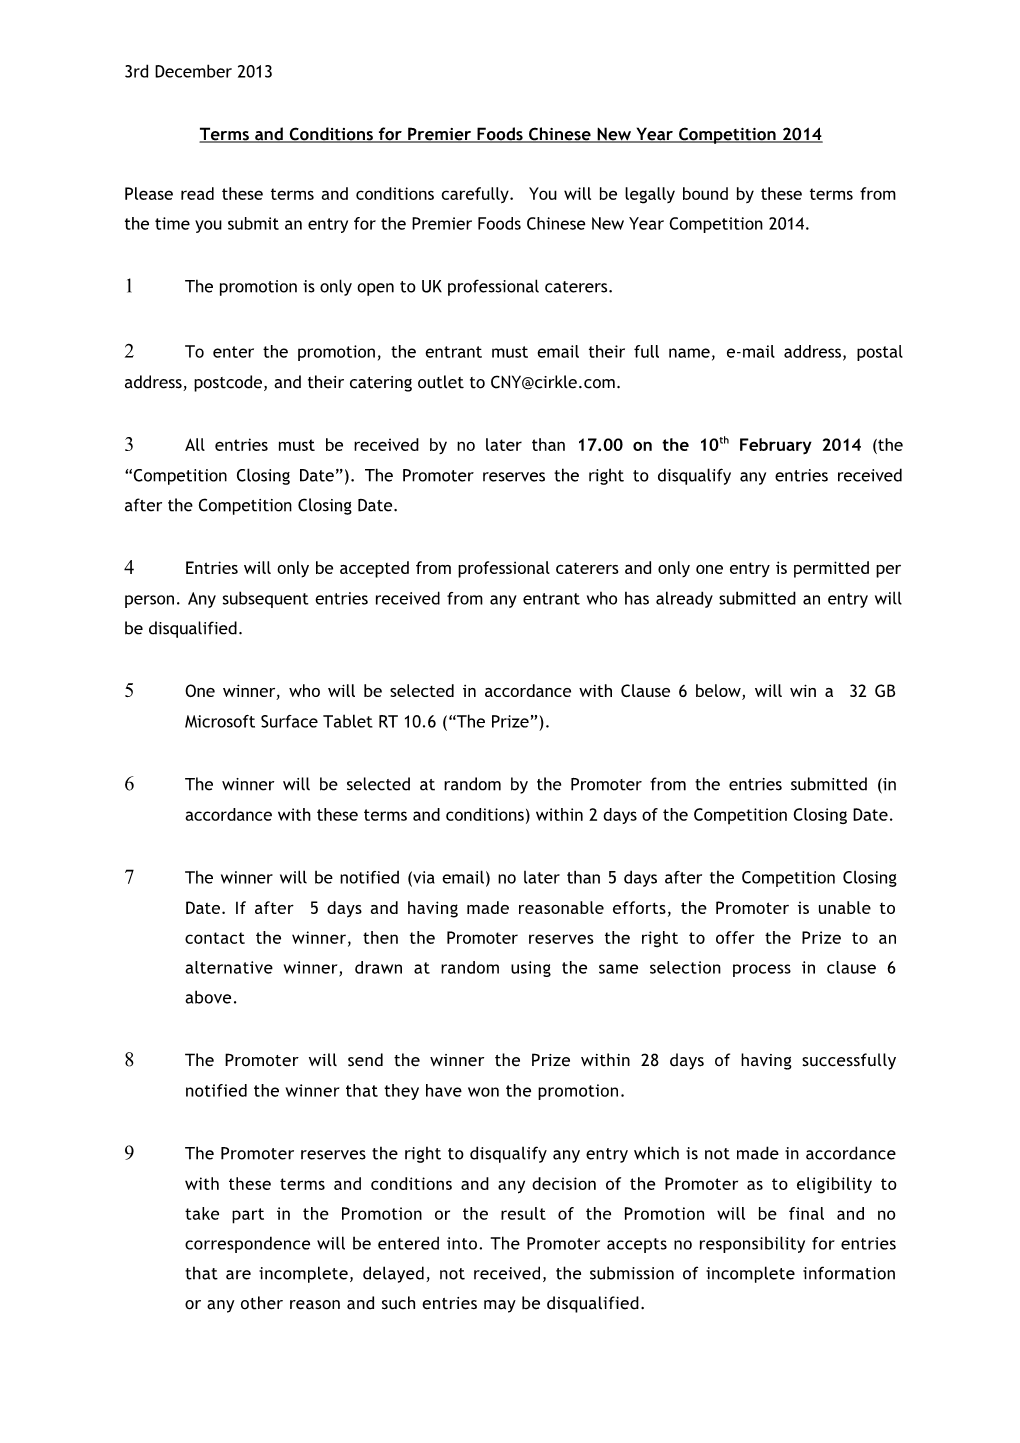 Terms and Conditions for Premier Foods Chinese New Year Competition 2014